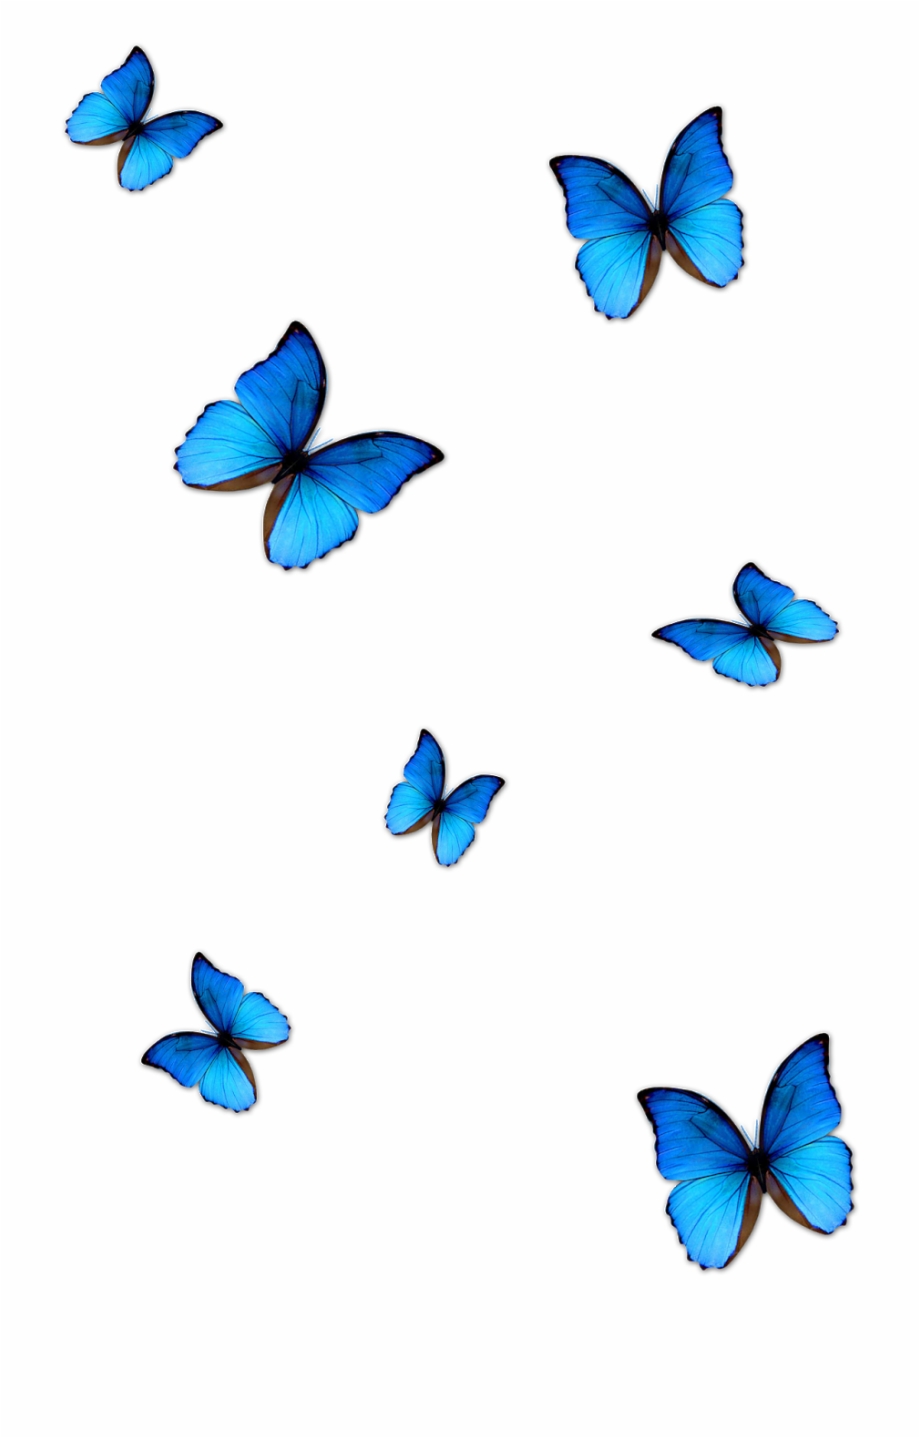 Kisspng Butterfly Blue Phengaris Alcon Blue Butterfly Butterfly